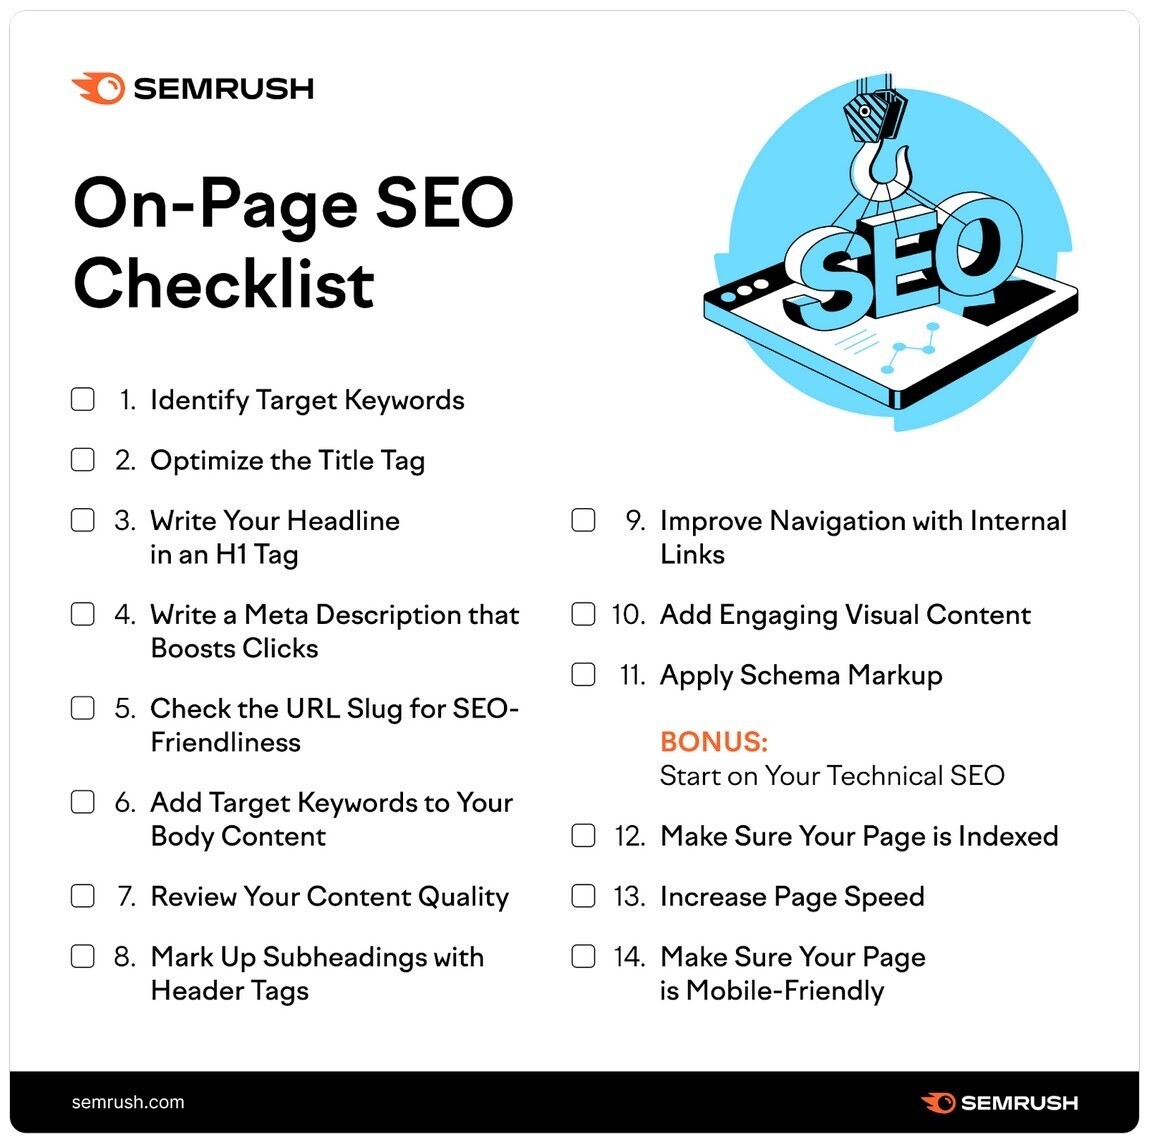 "On-Page SEO Checklist" infographic by Semrush shows list of on-page SEO tips with simple graphics